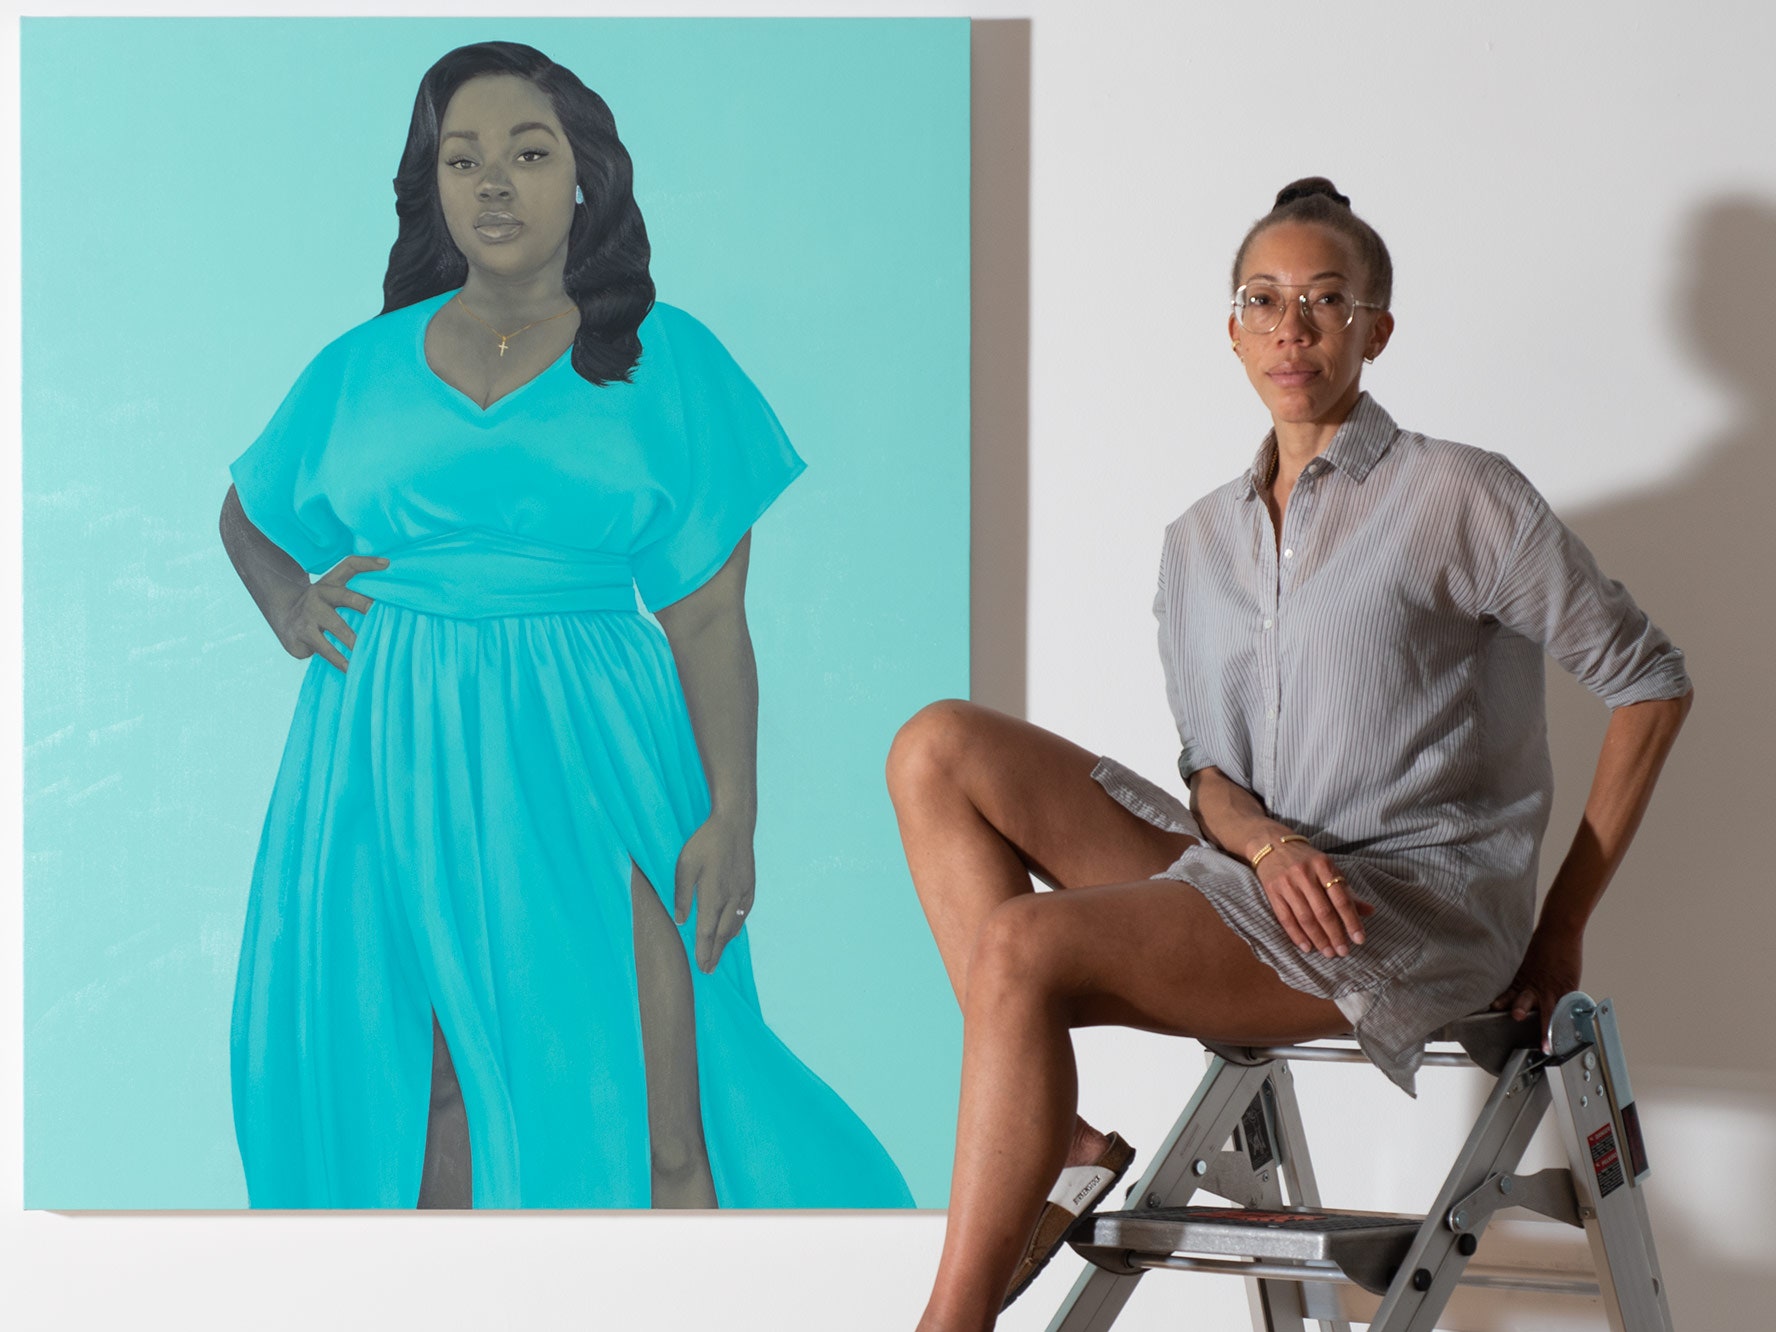 A medium-dark skinned woman sits on an industrial folding ladder next to a large, ethereal, painted portrait of a young woman whose skin is rendered in greyscale. The subject wears a flowing, light blue dress and stands confidently, one hand on her hip, with a kind and knowing gaze fixed on the viewer. The painting's background is also light blue.